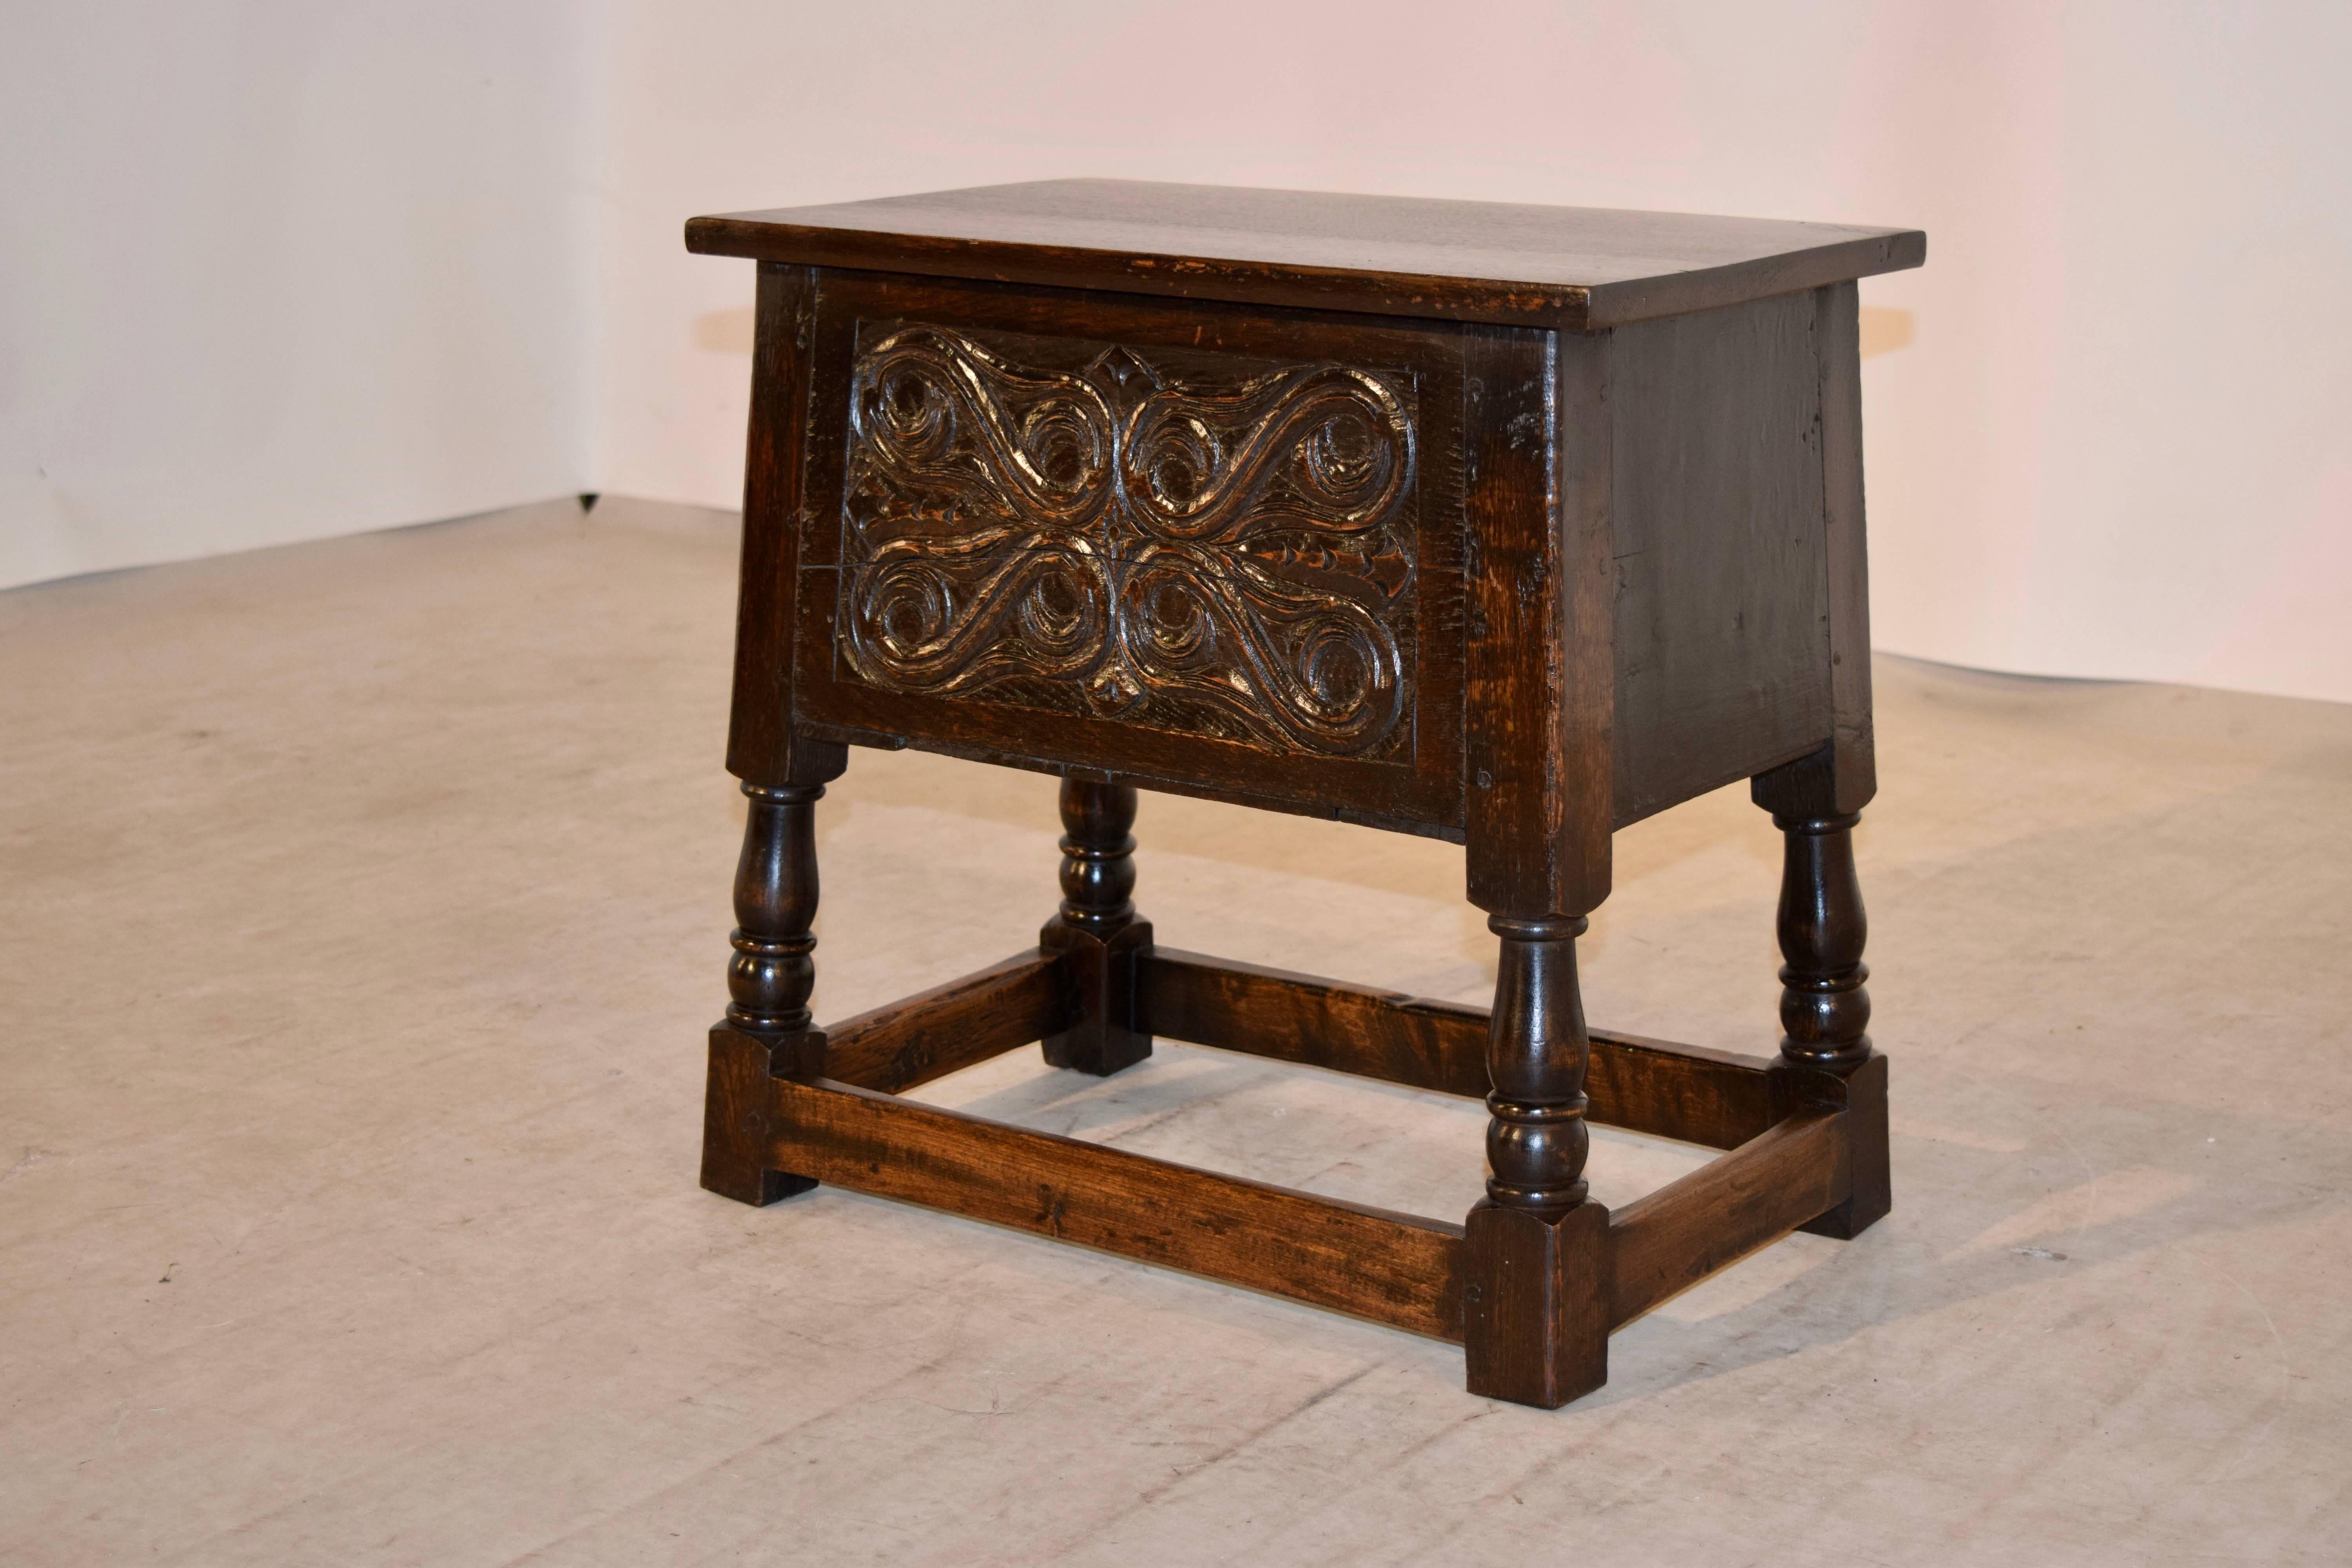 Late 19th century lift top oak stool from England. The top lifts to reveal a nice storage compartment. The front panel is hand-carved decorated, and the piece is supported on sturdy hand turned splayed legs joined by stretchers.